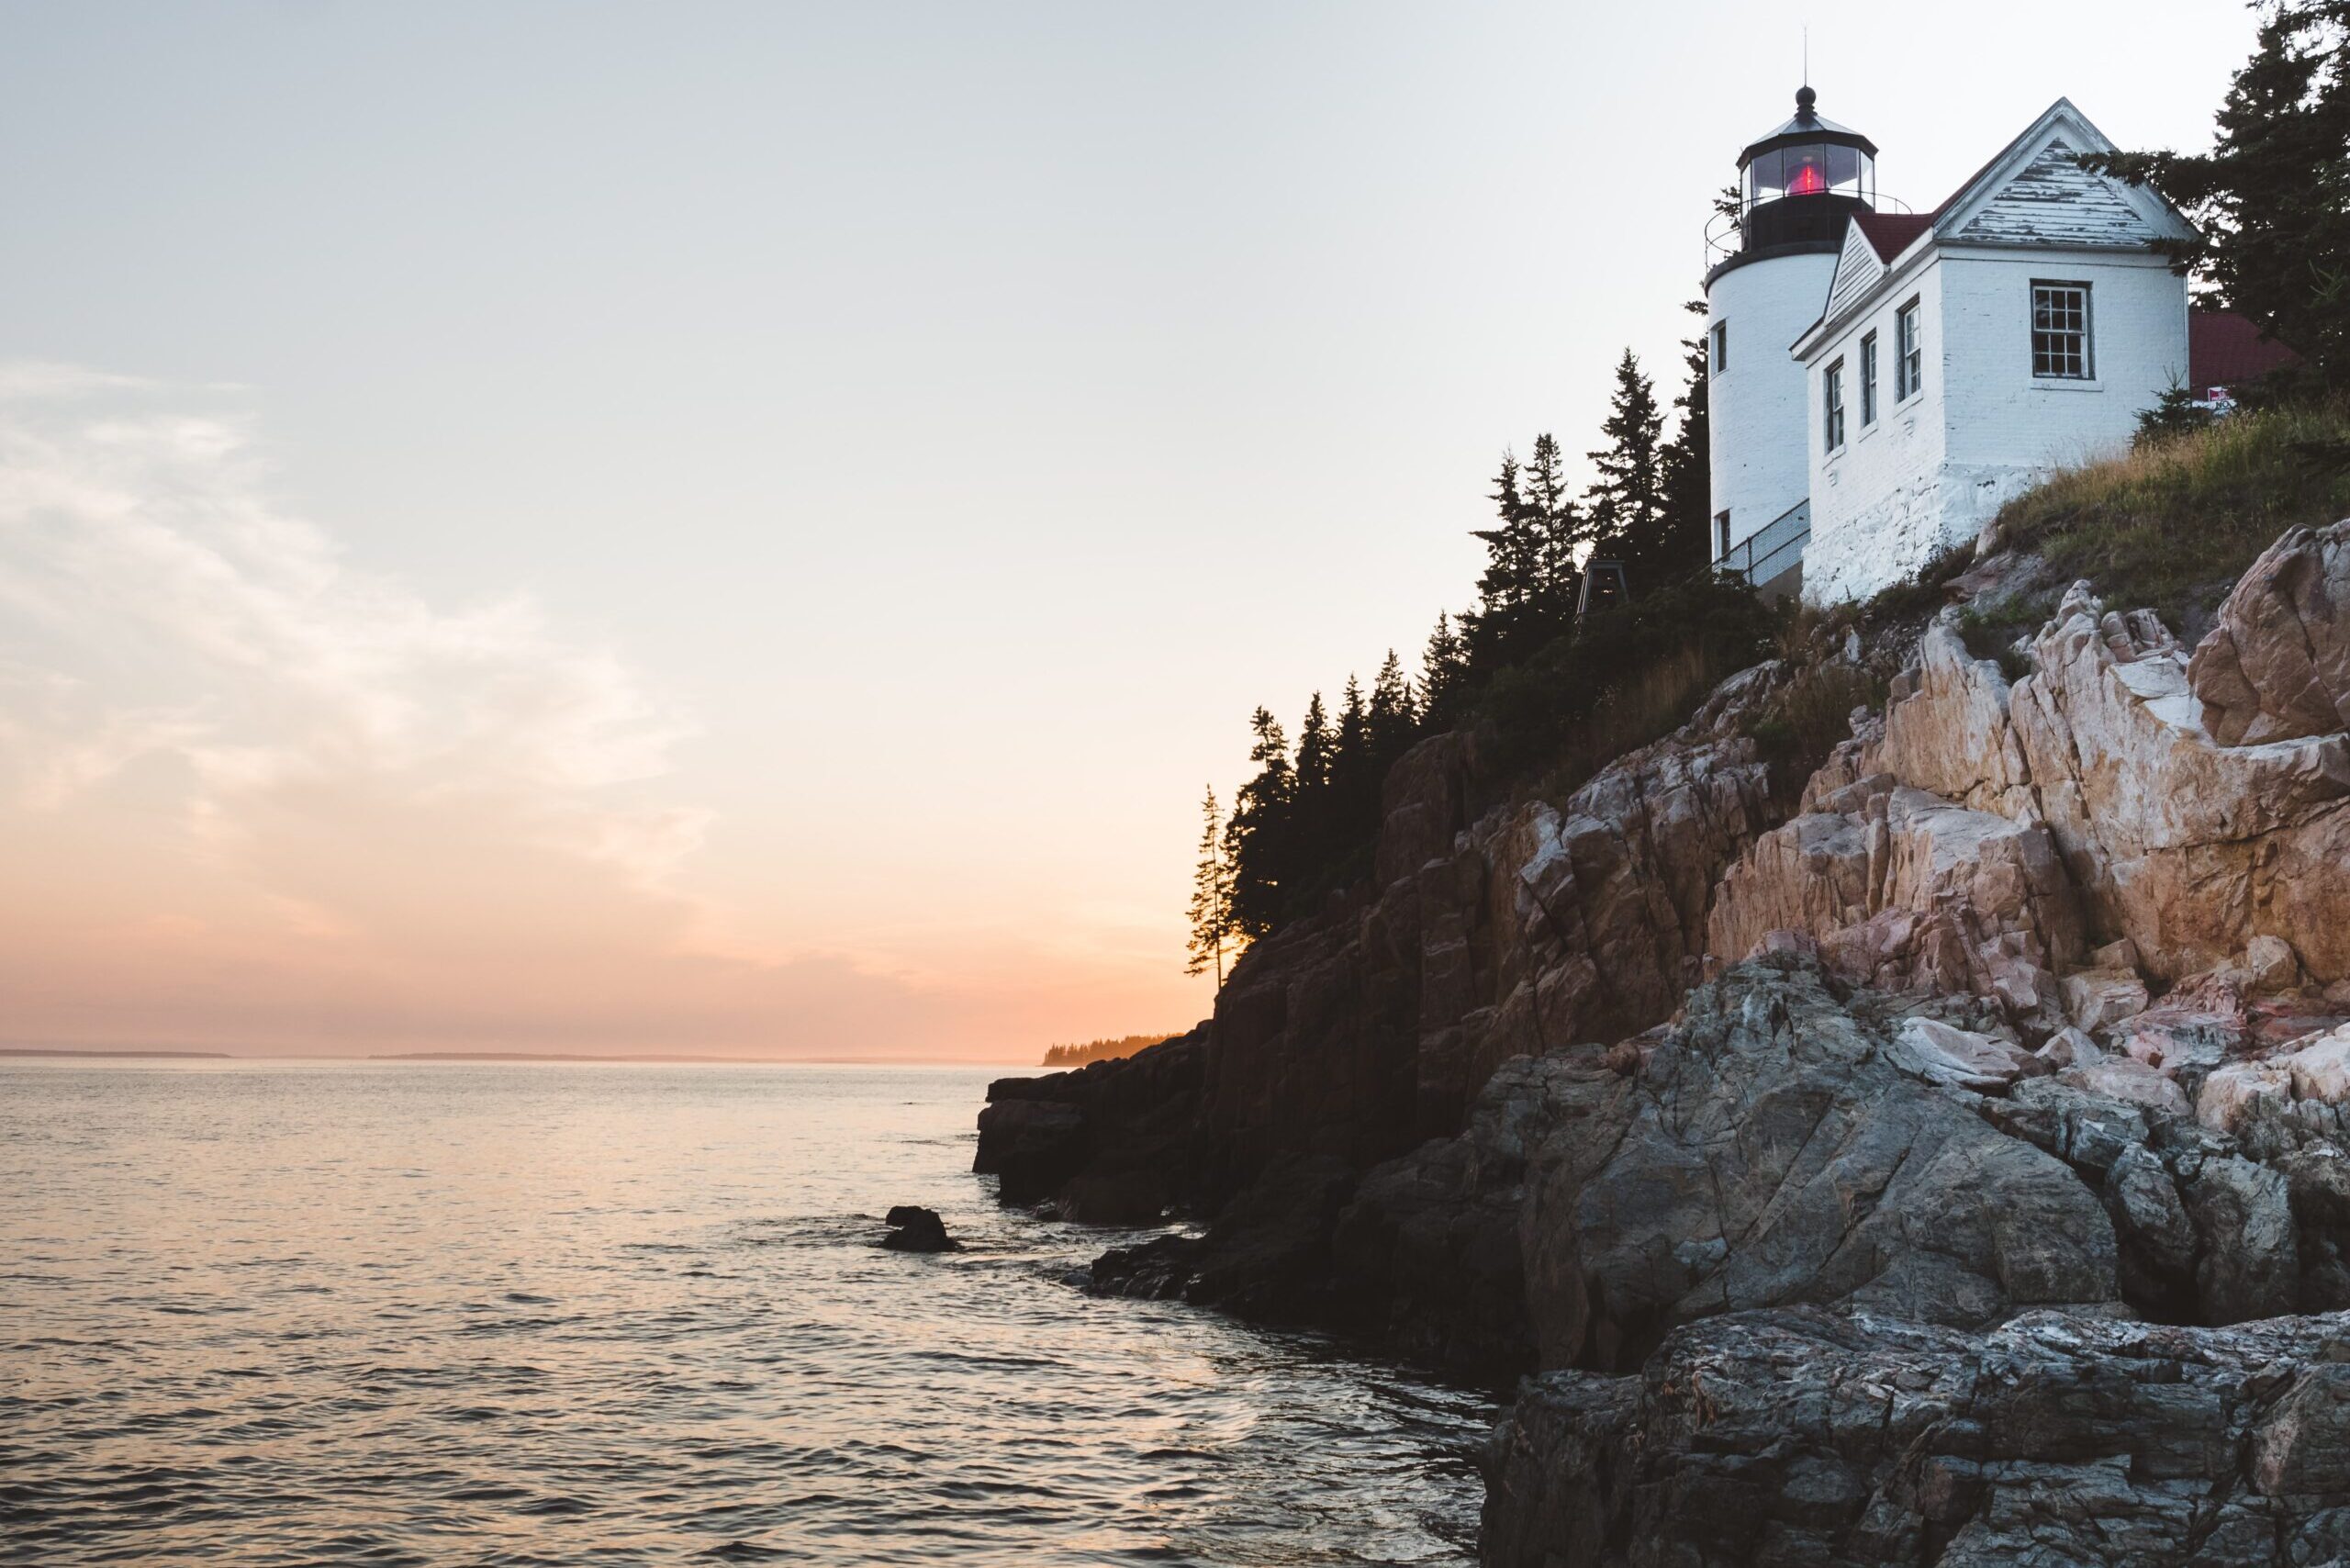 Lighthouse surrounded by pine trees, sits along a rocky cliff on the coast